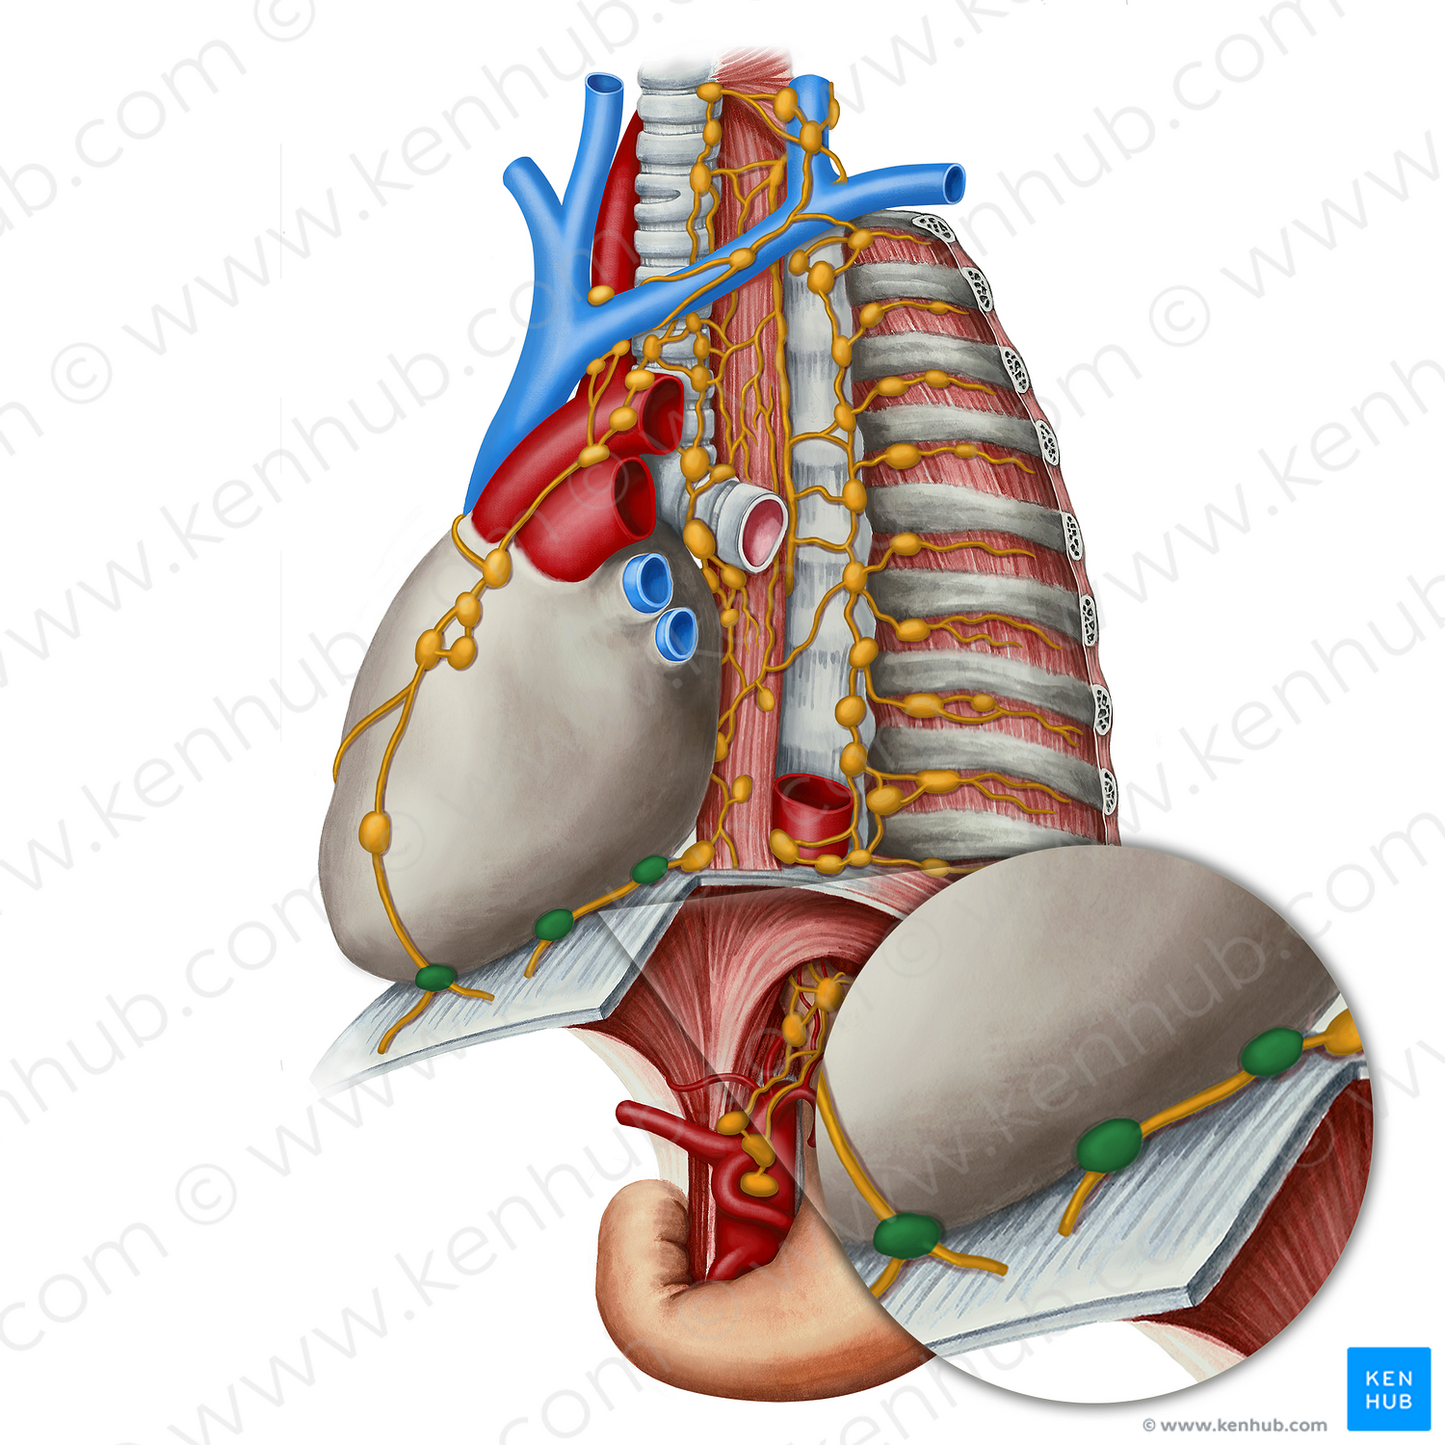 Lateral pericardial lymph nodes (#21825)